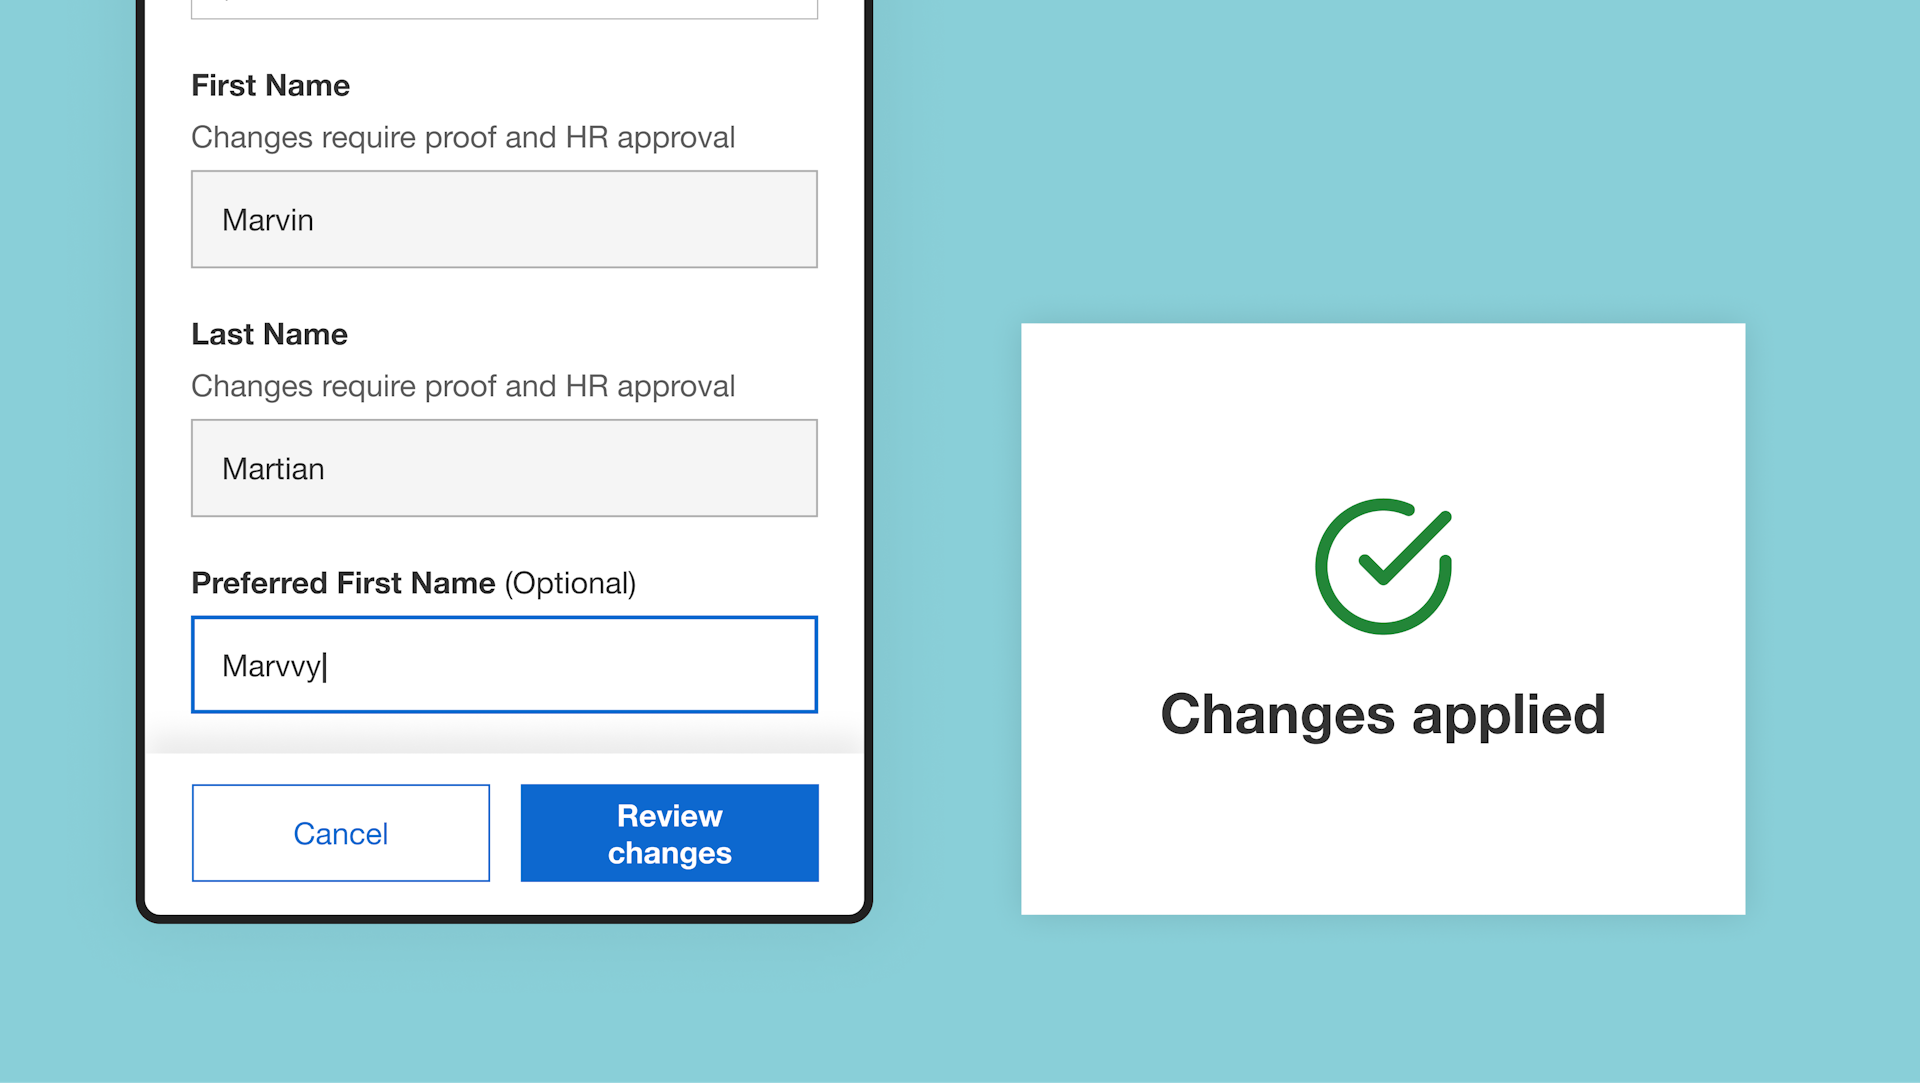 Screenshot of a form to update personal details on the UCL employee experience platform